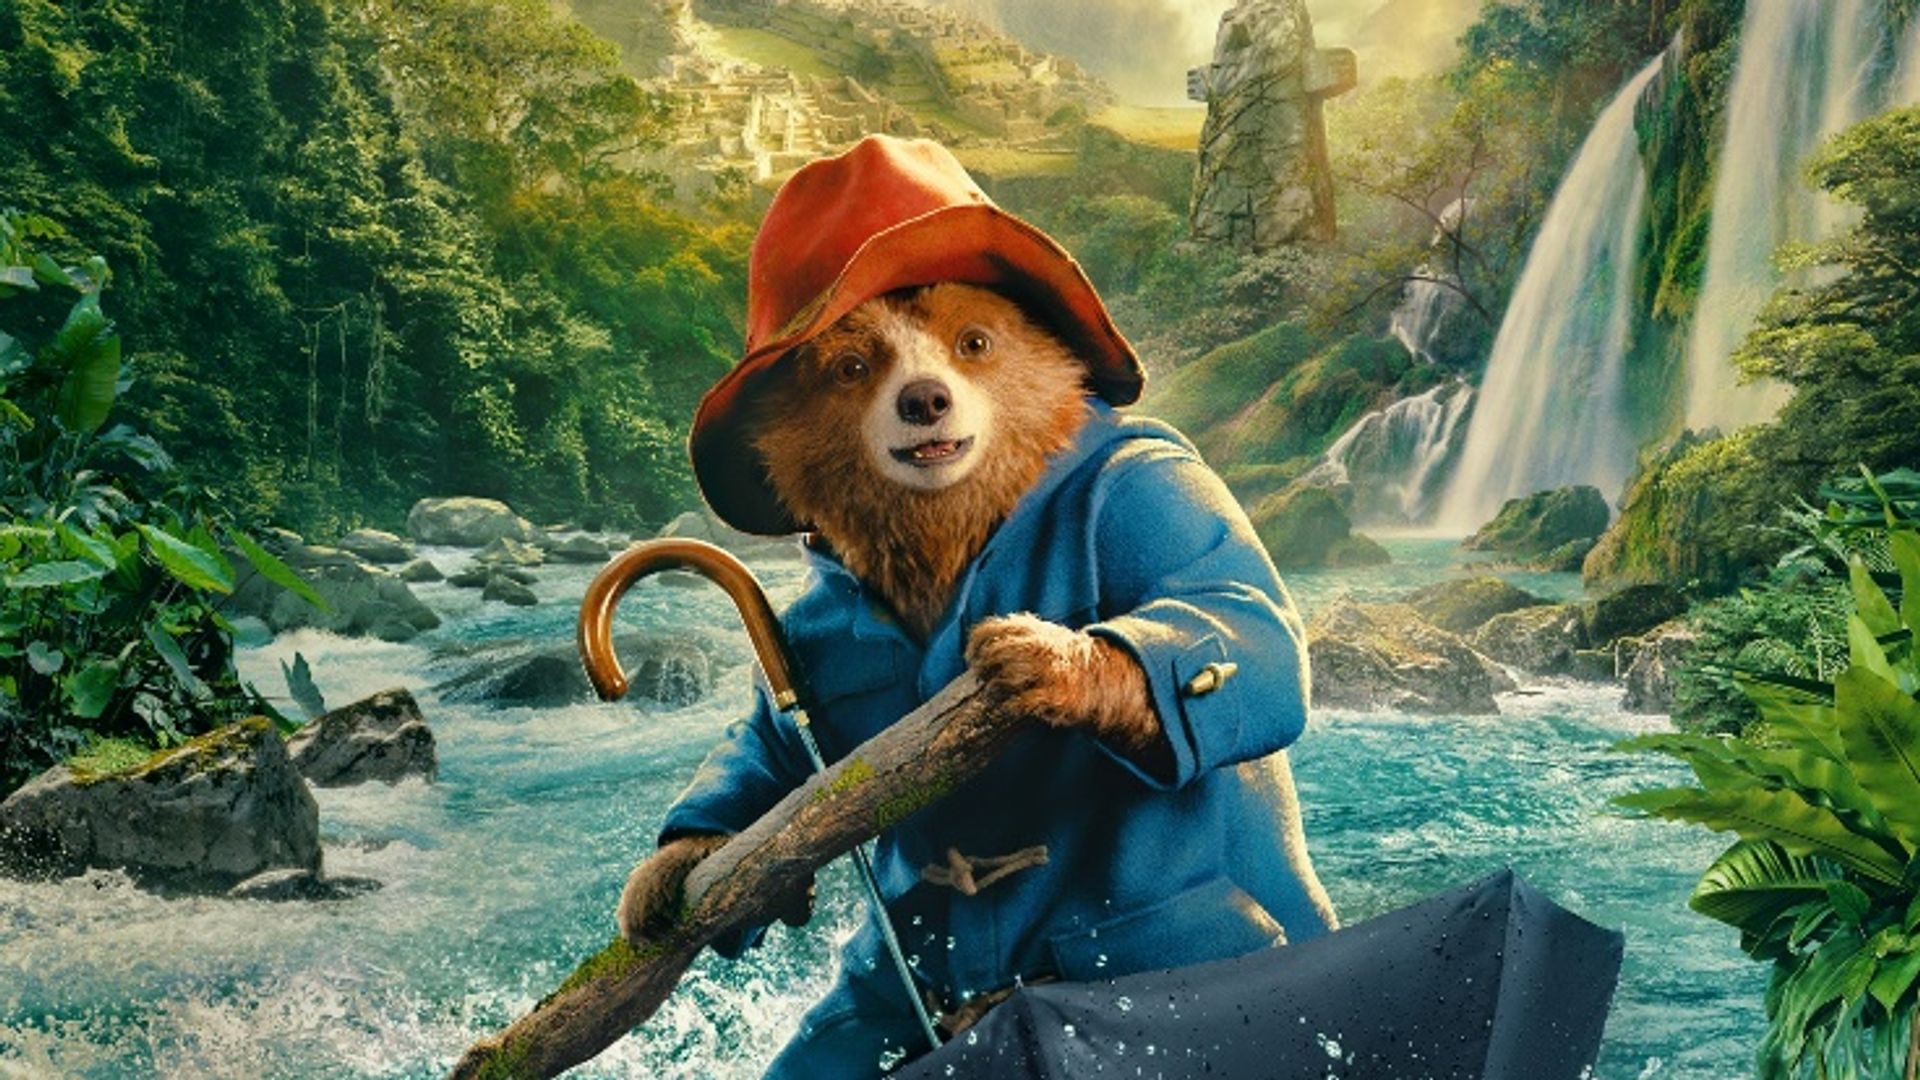 Paddington in Peru trailer is here - but major star is missing